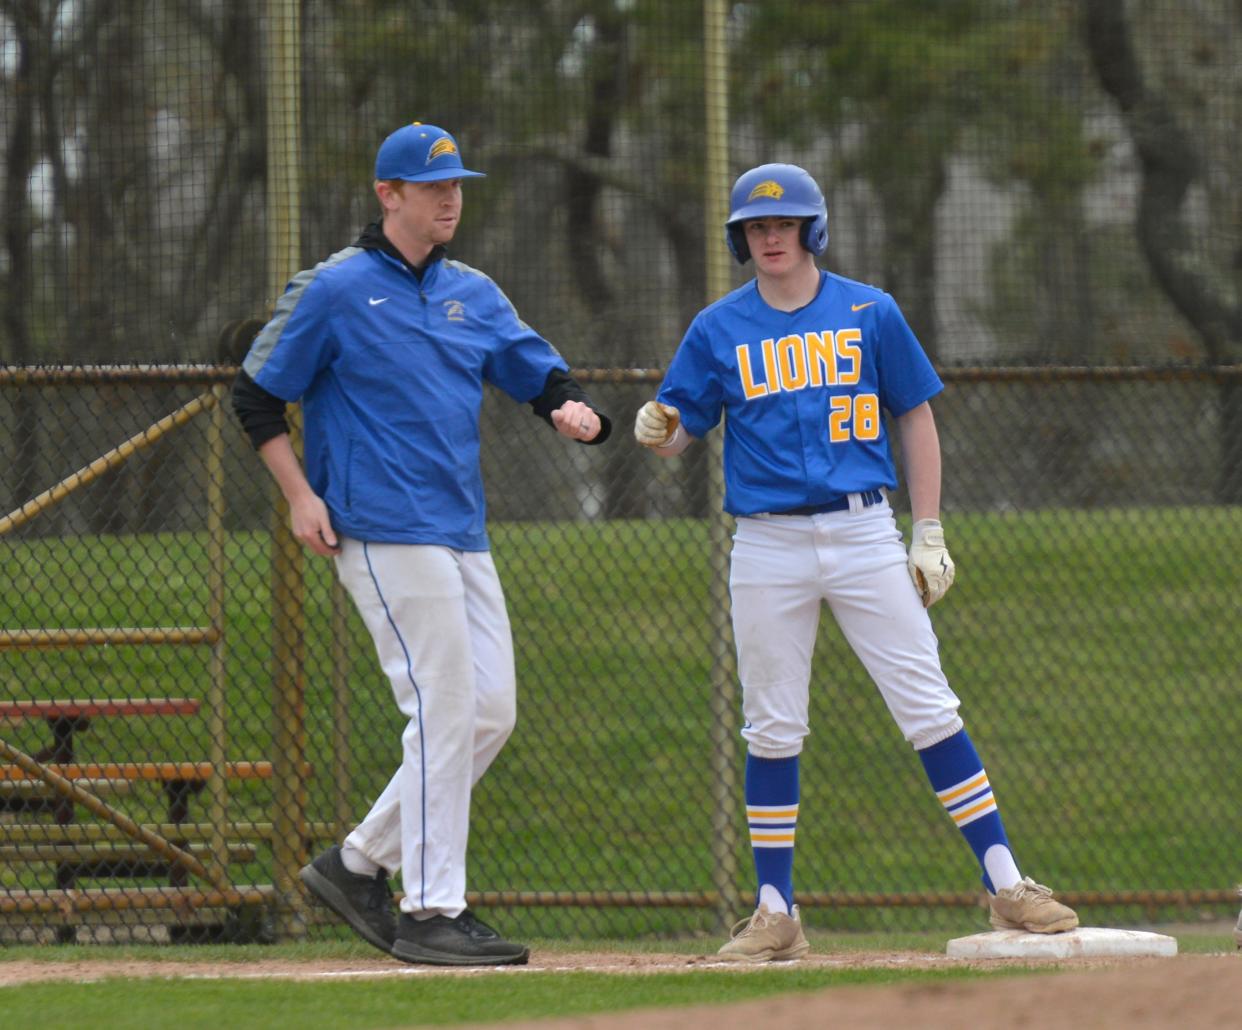 St. John Paul II coach Michael Young, left, fist bumps with player Colin Buckley who made it to third base in first inning action.